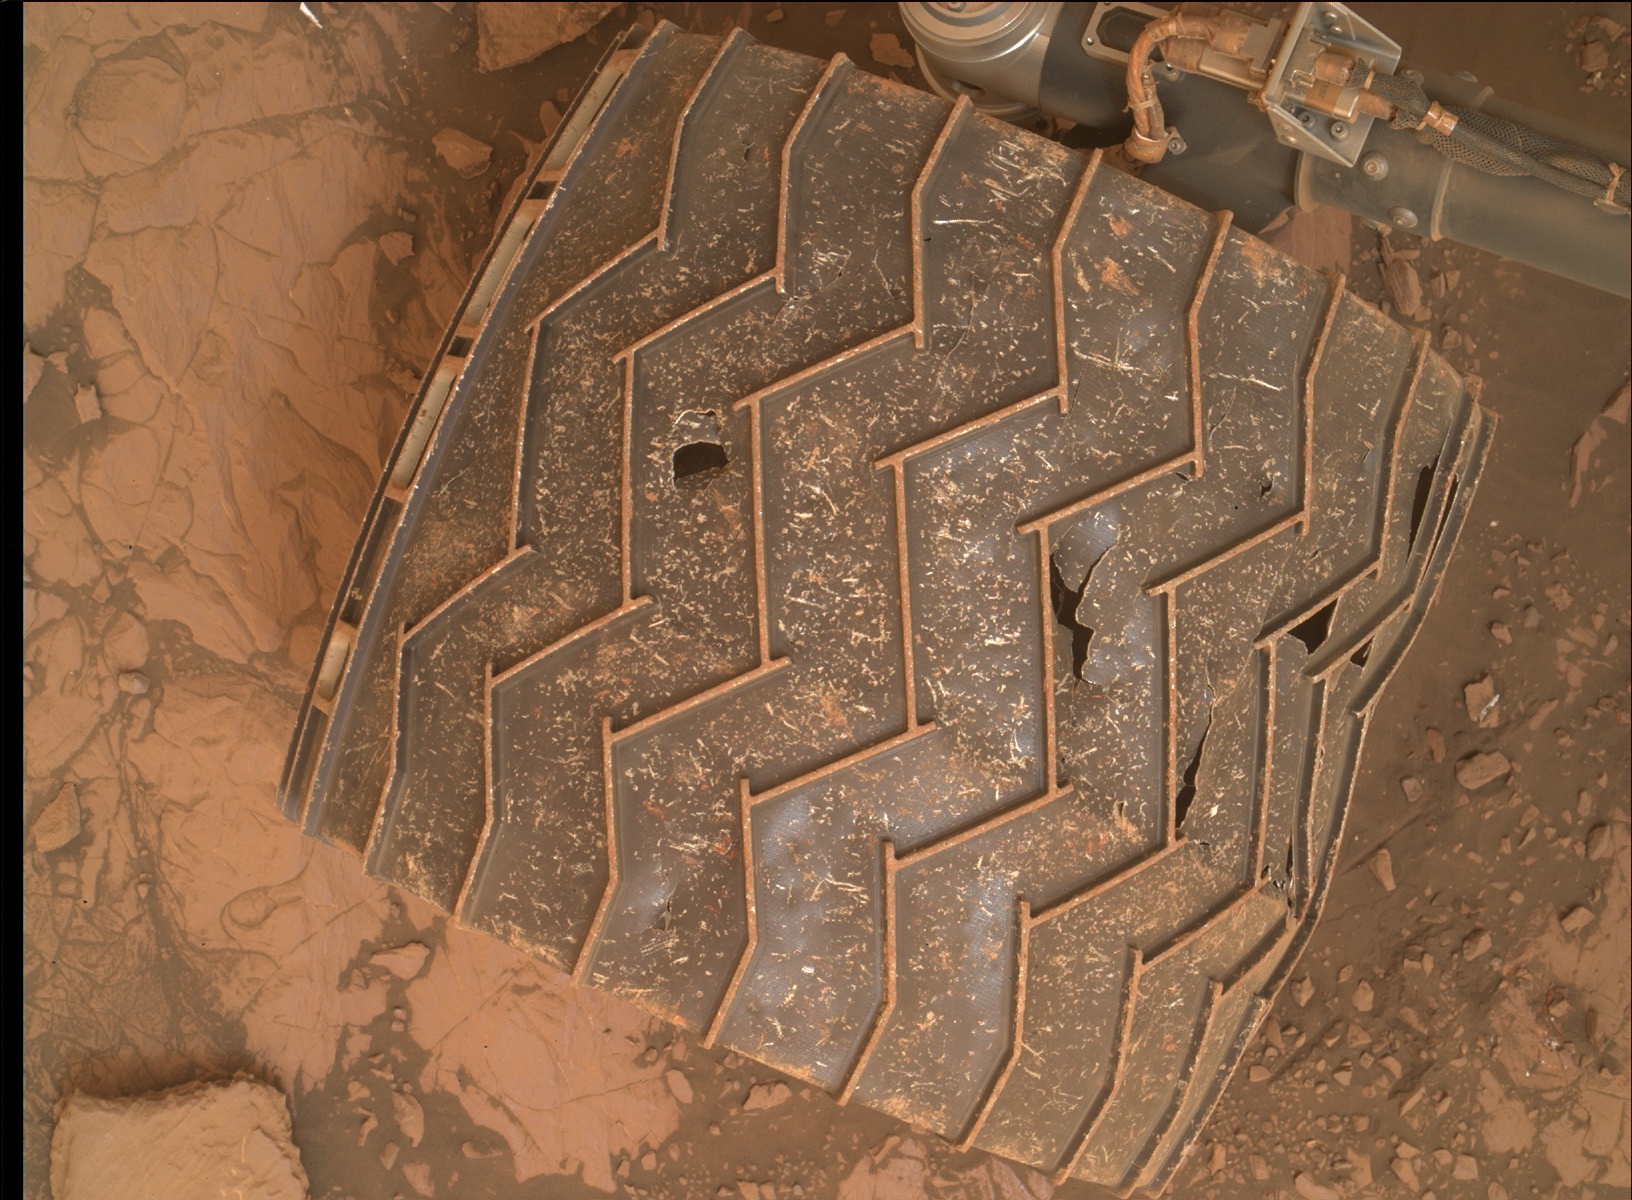 Nasa's Mars rover Curiosity acquired this image using its Mars Hand Lens Imager (MAHLI) on Sol 2115